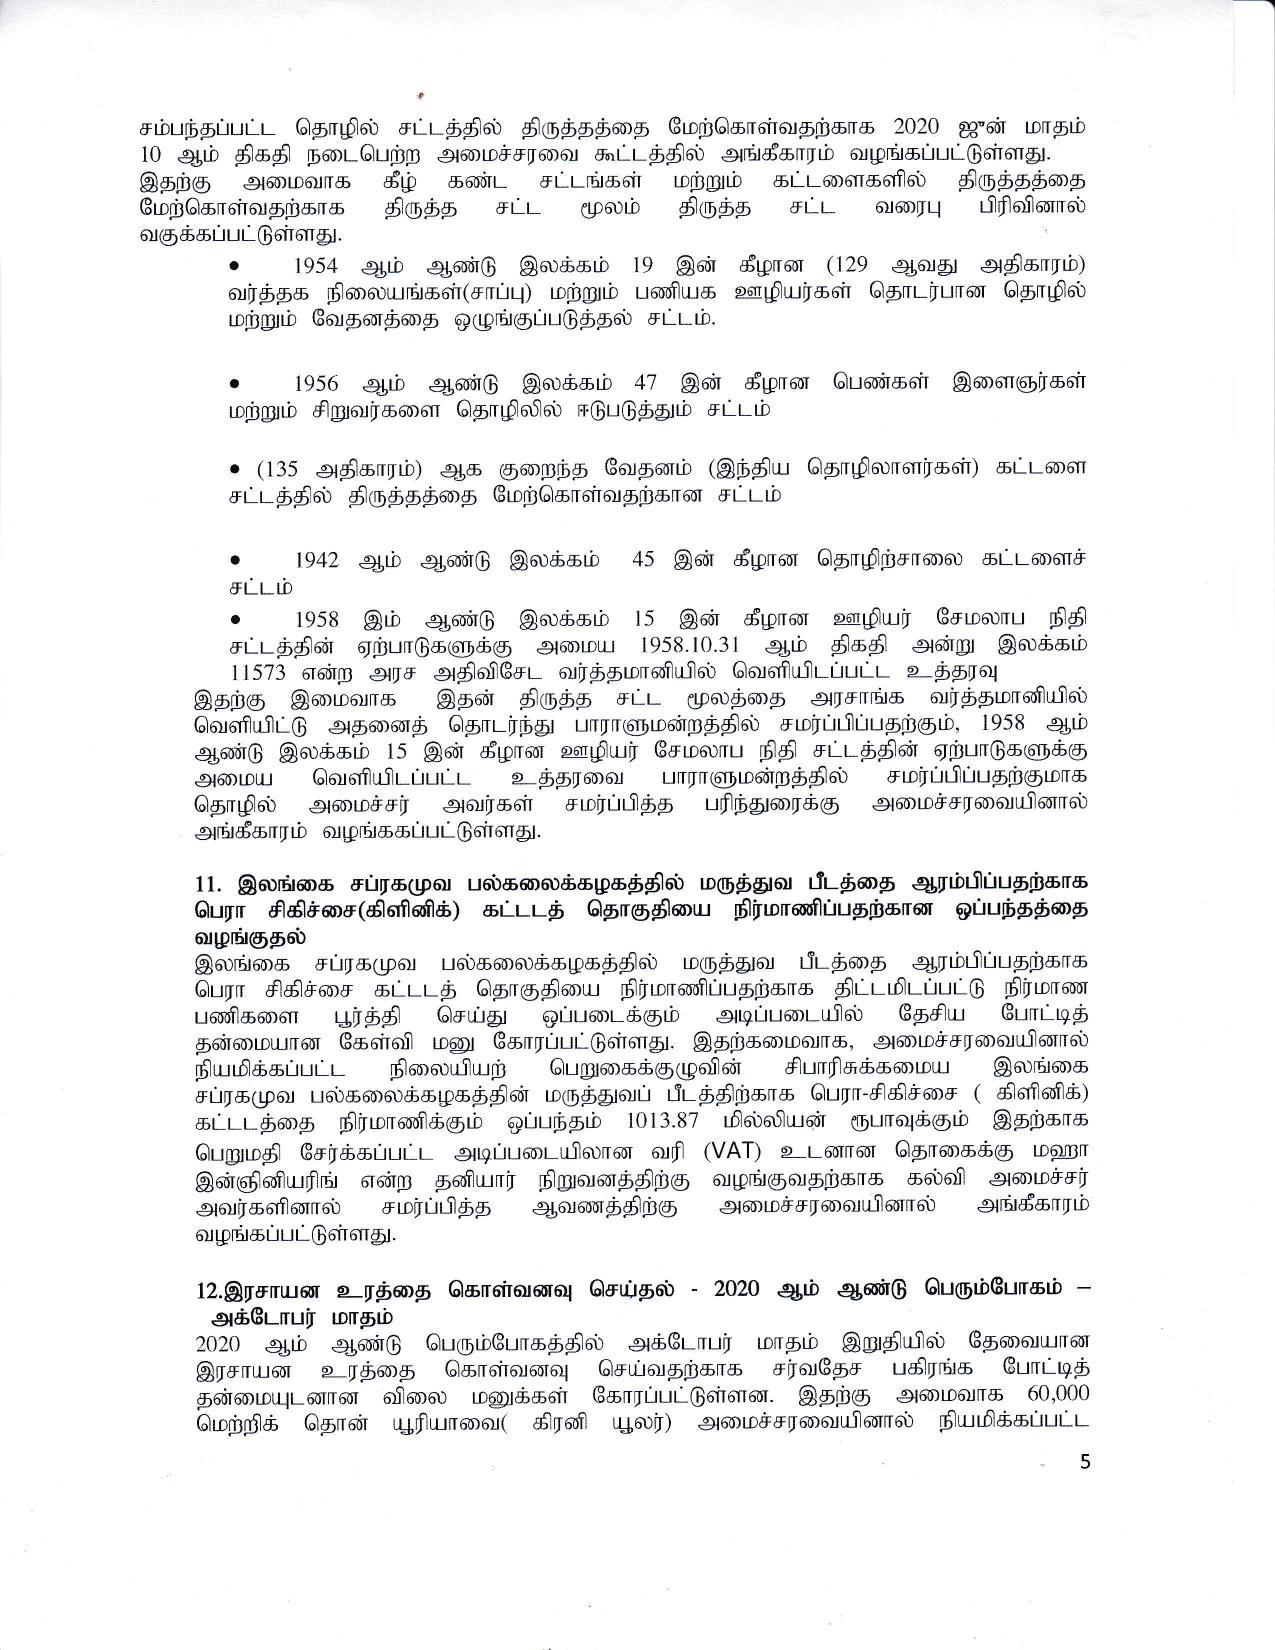 Cabinet Decision on 16.09.2020 0 Tamil 1 page 005